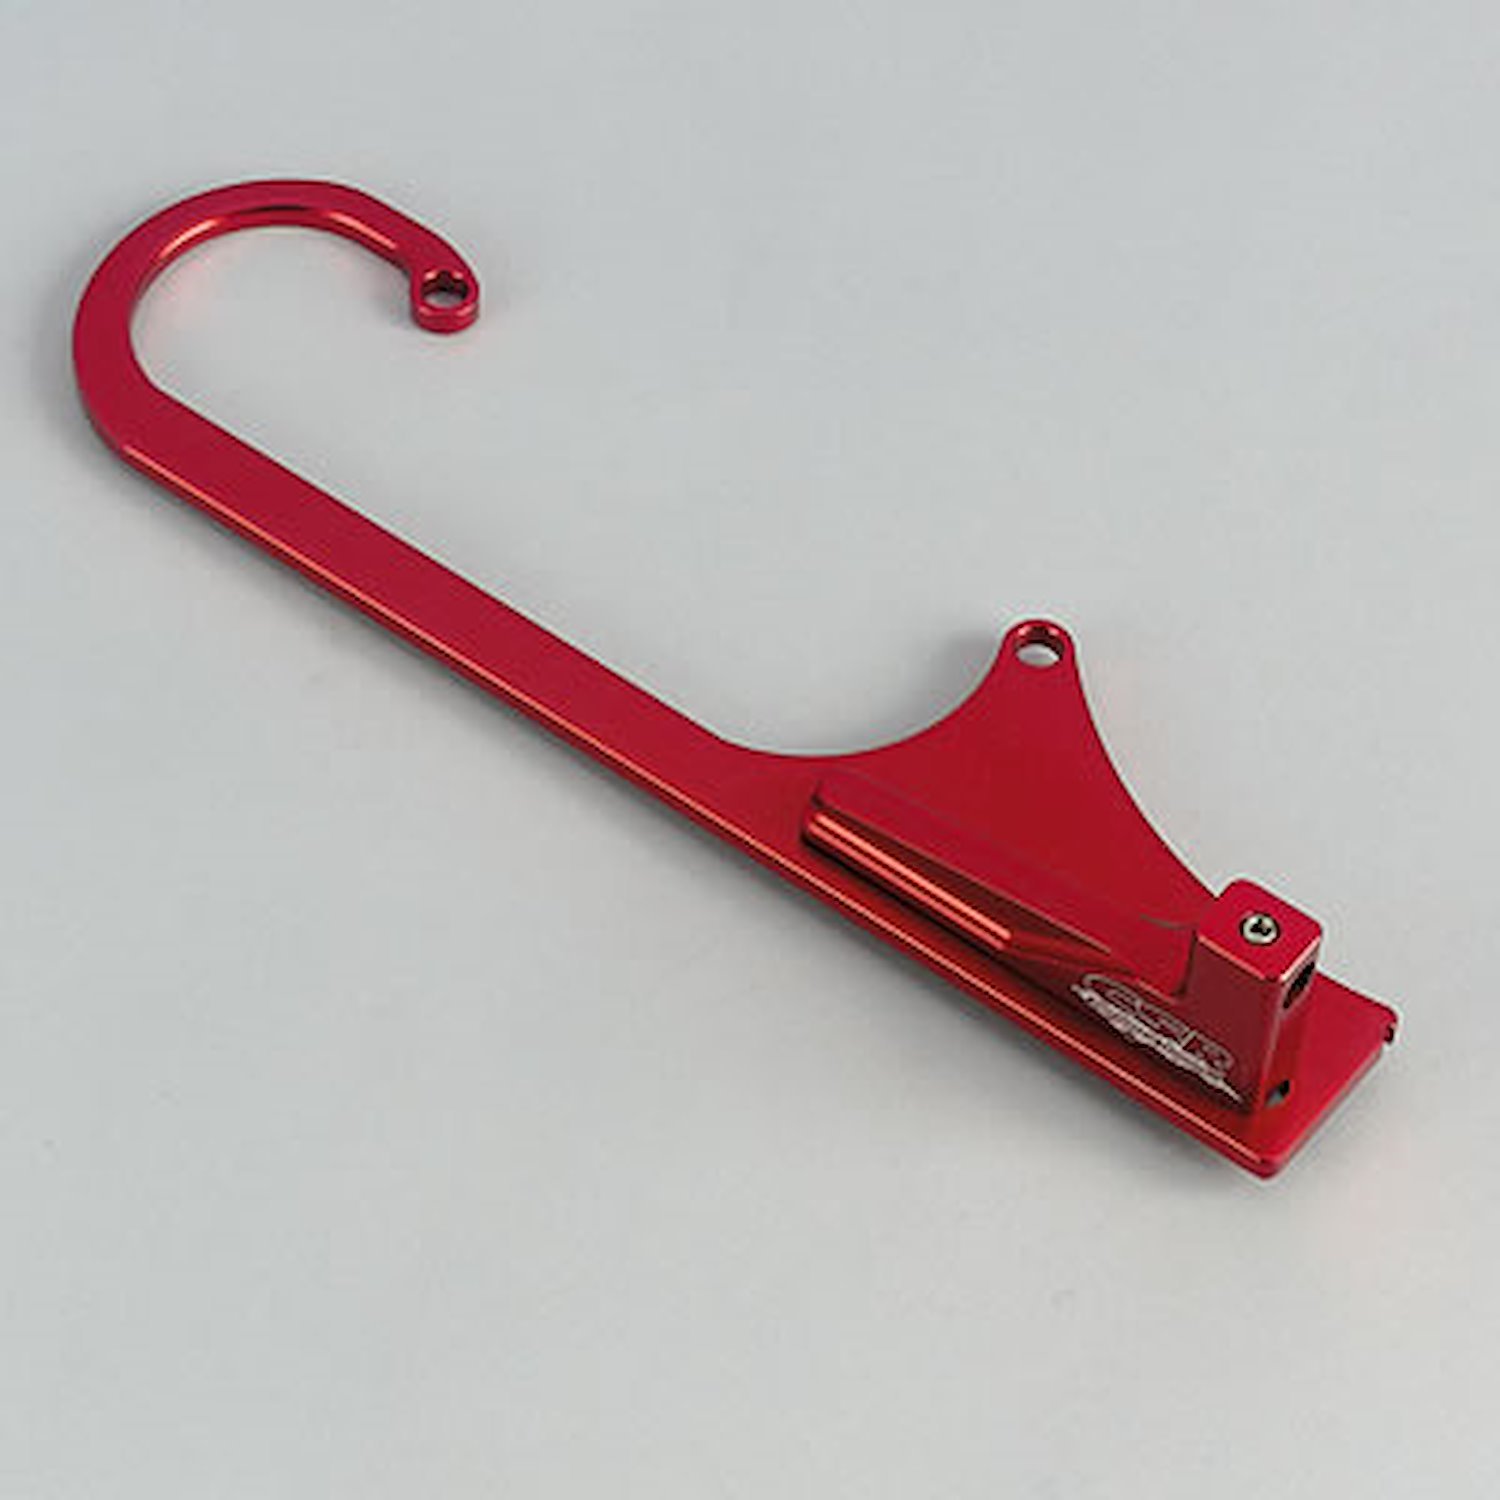 Adjustable Throttle Cable Bracket - Red Fits 4150/4160/3310